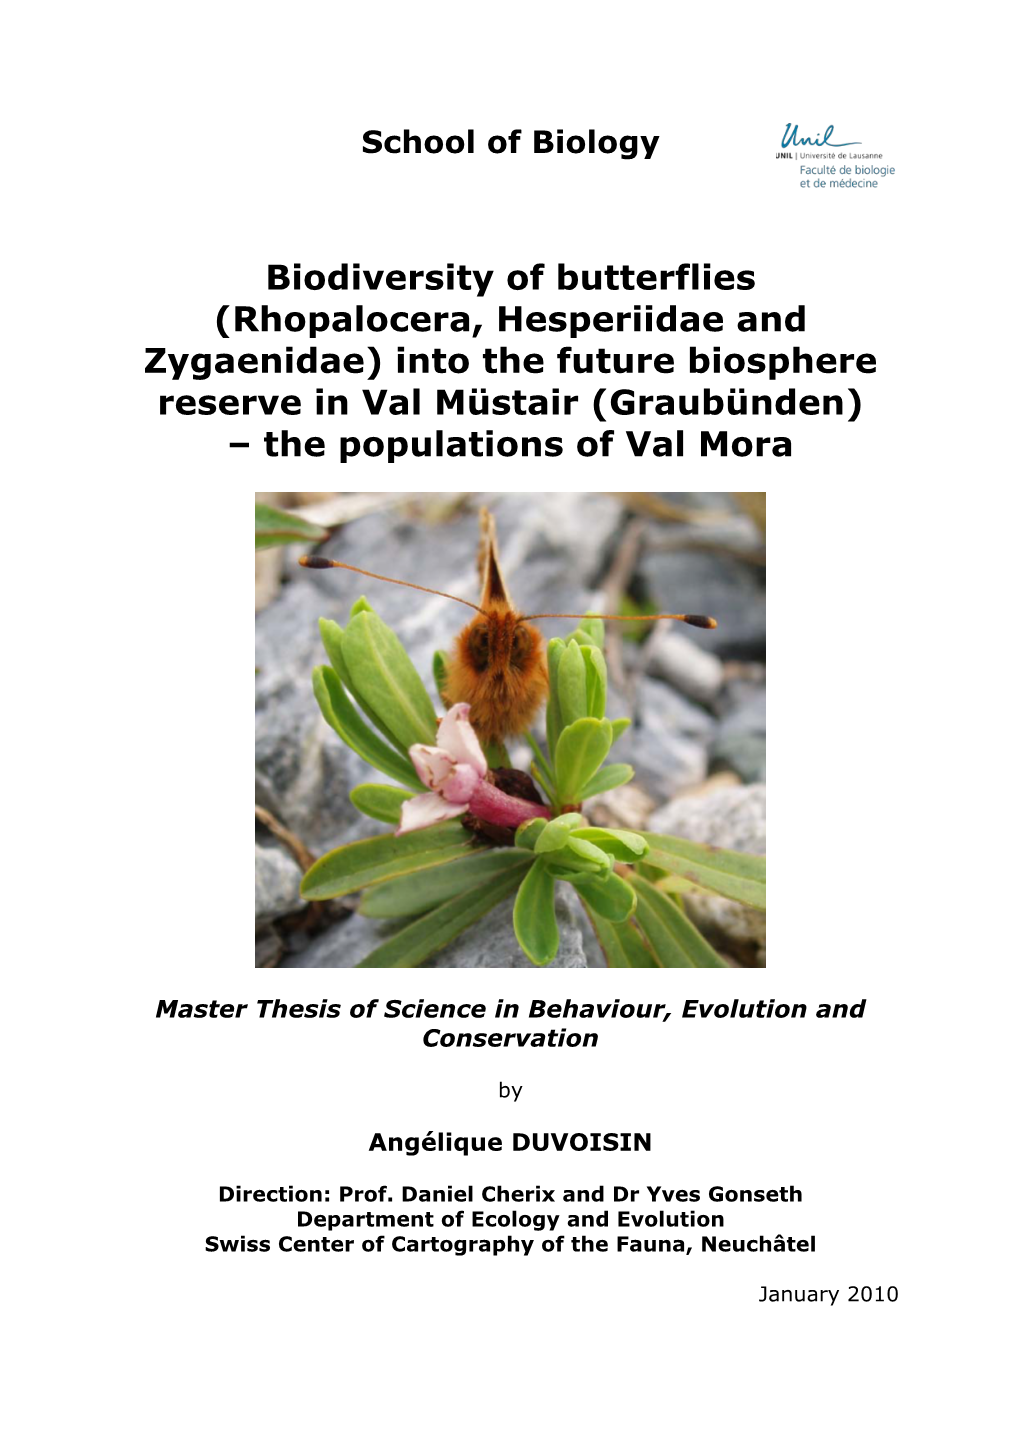 Biodiversity of Butterflies (Rhopalocera, Hesperiidae and Zygaenidae) Into the Future Biosphere Reserve in Val Müstair (Graubünden) – the Populations of Val Mora